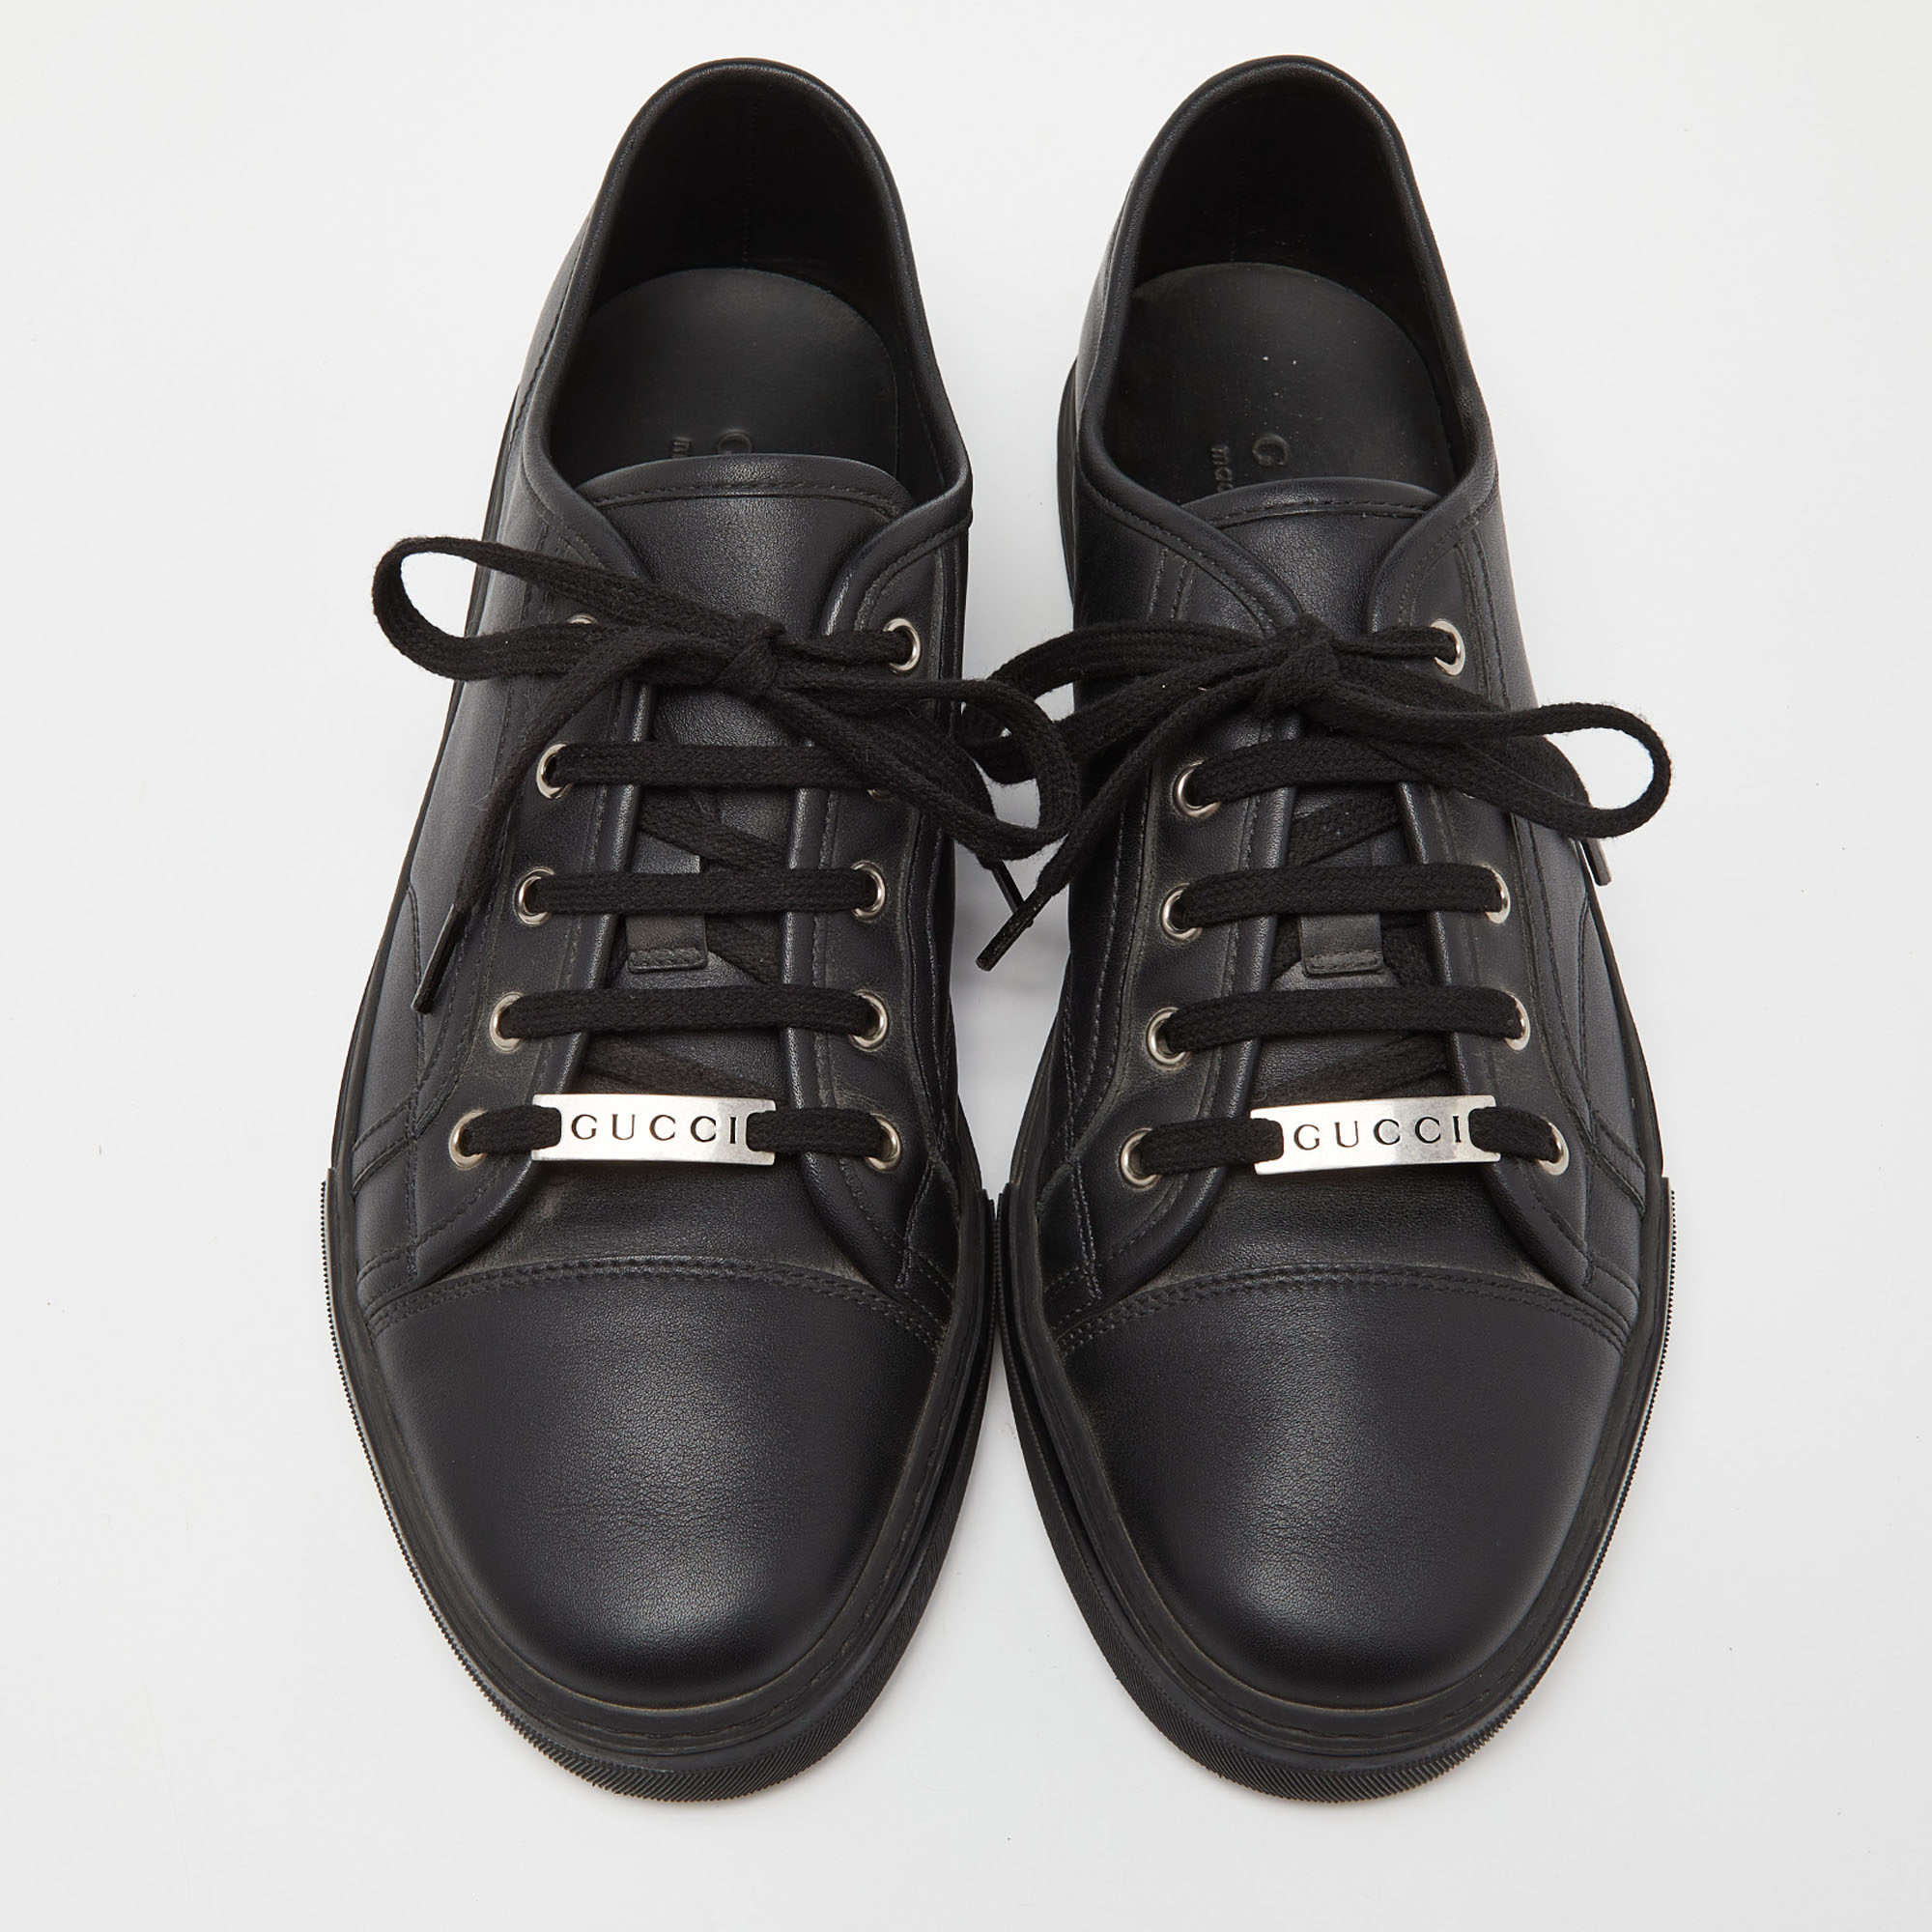 Gucci Black Leather Low Top Sneakers Size 43